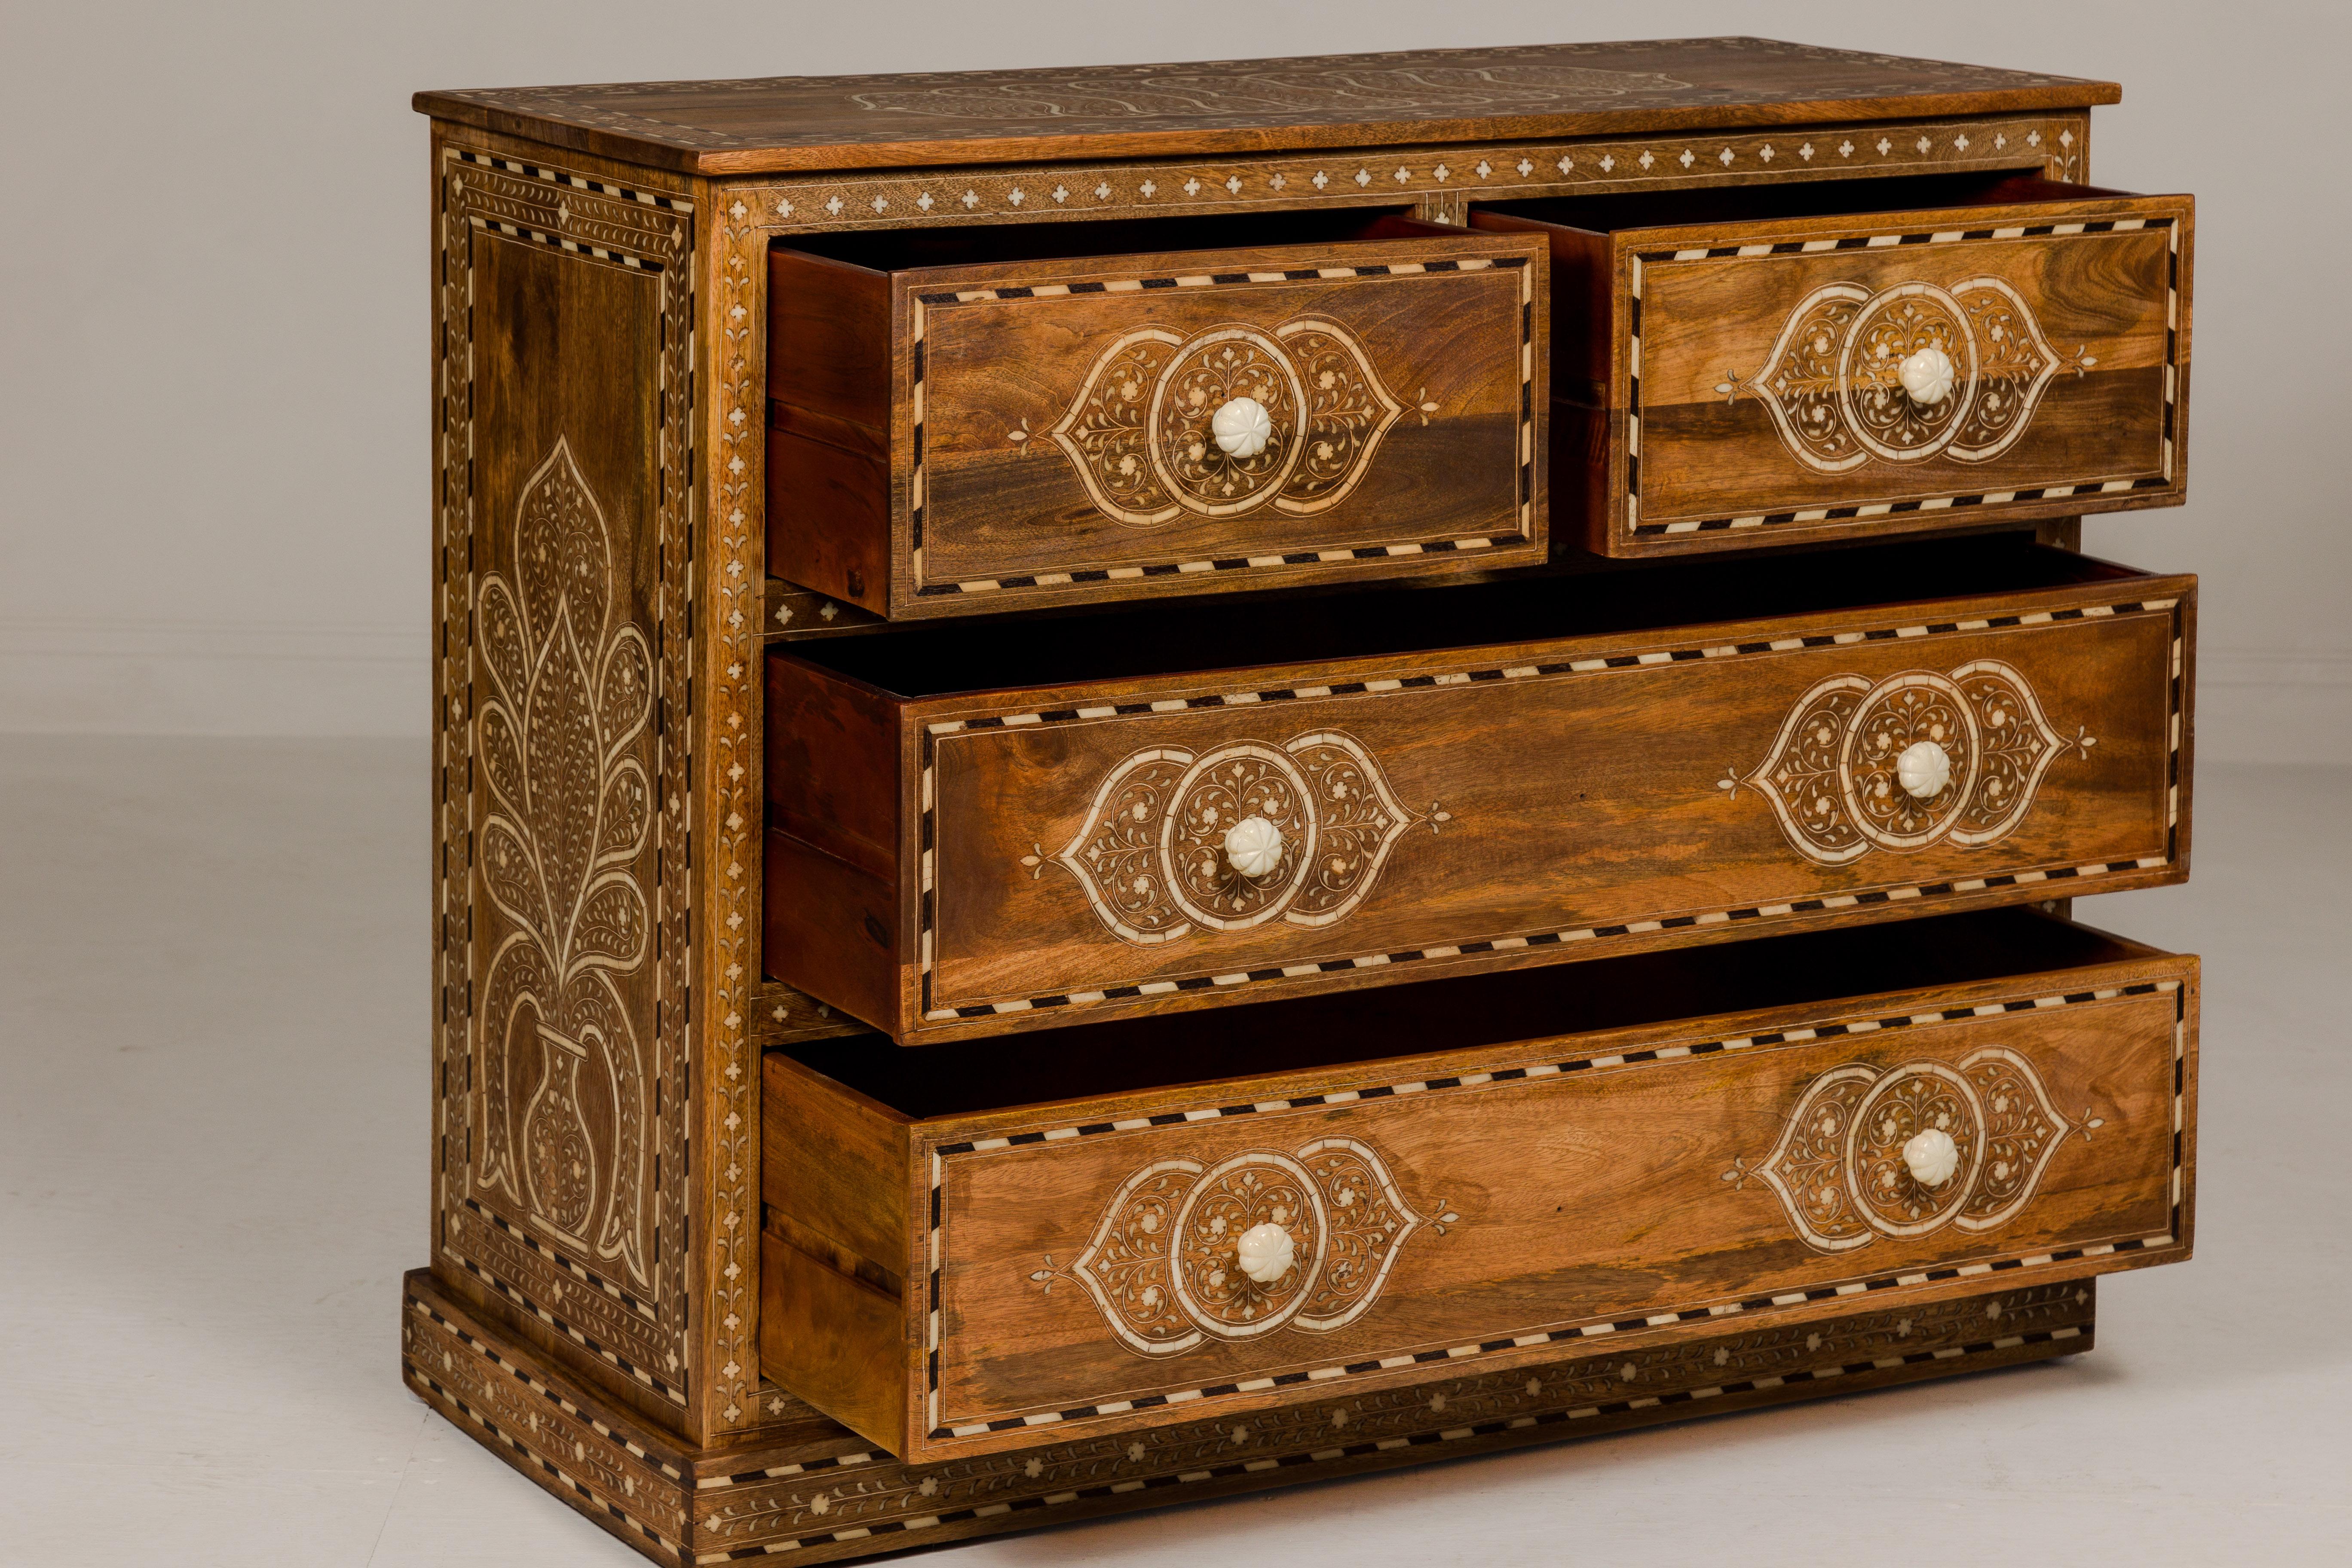 Anglo Indian Style Mango Wood Chest with Four Drawers and Floral Bone Inlay For Sale 5